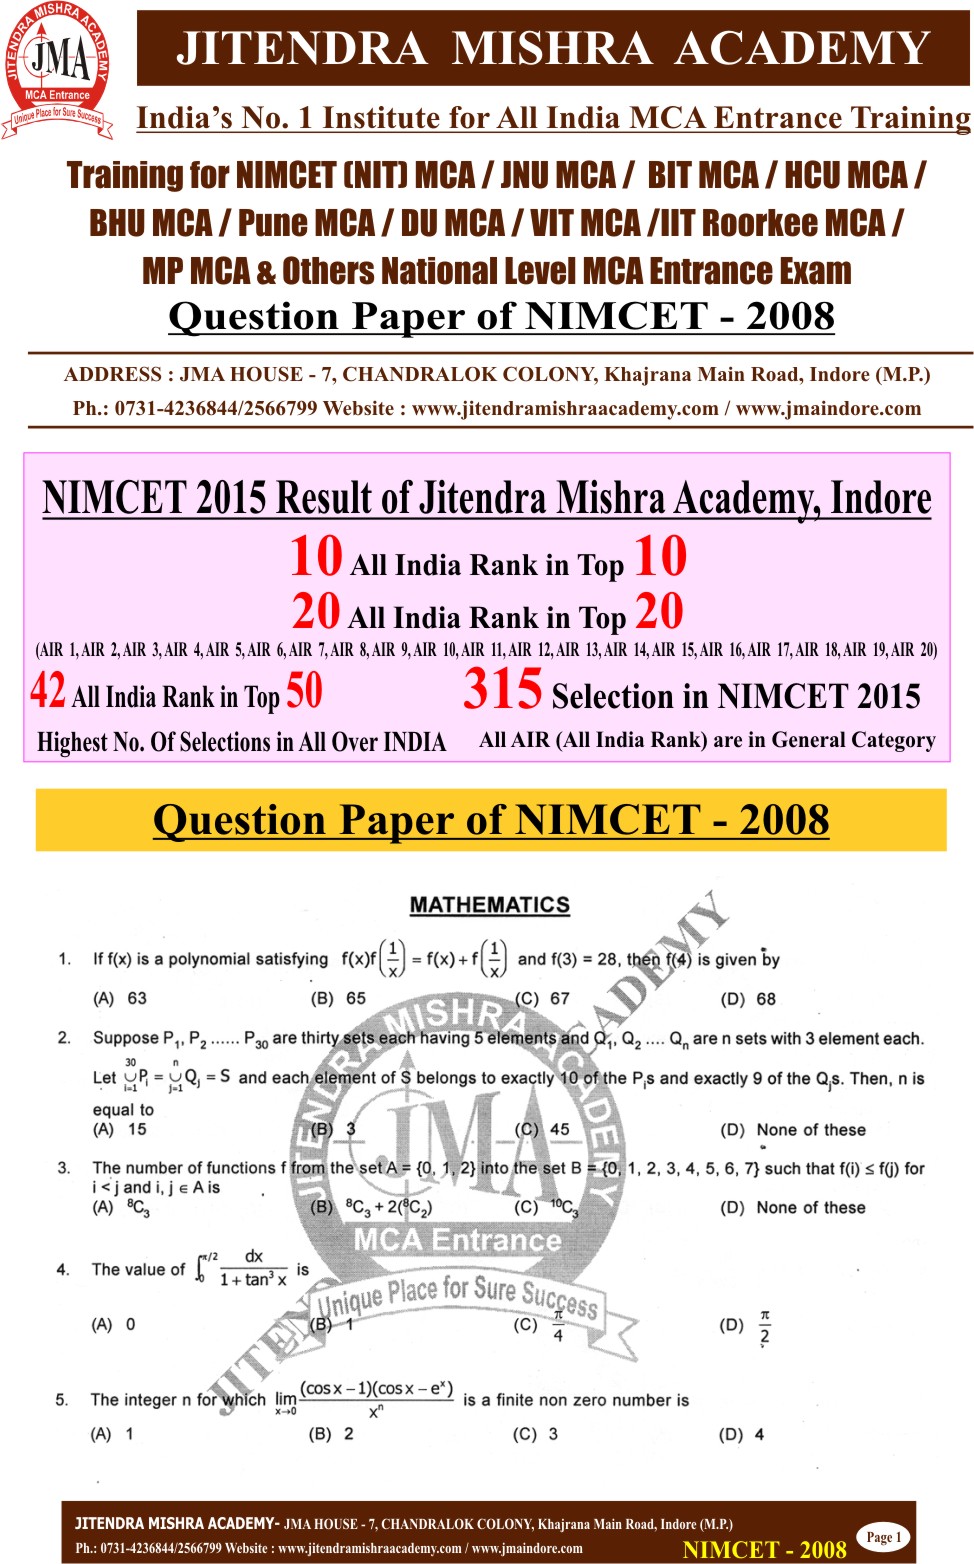 NIMCET 2008 PAPER (FIRST PAGE)